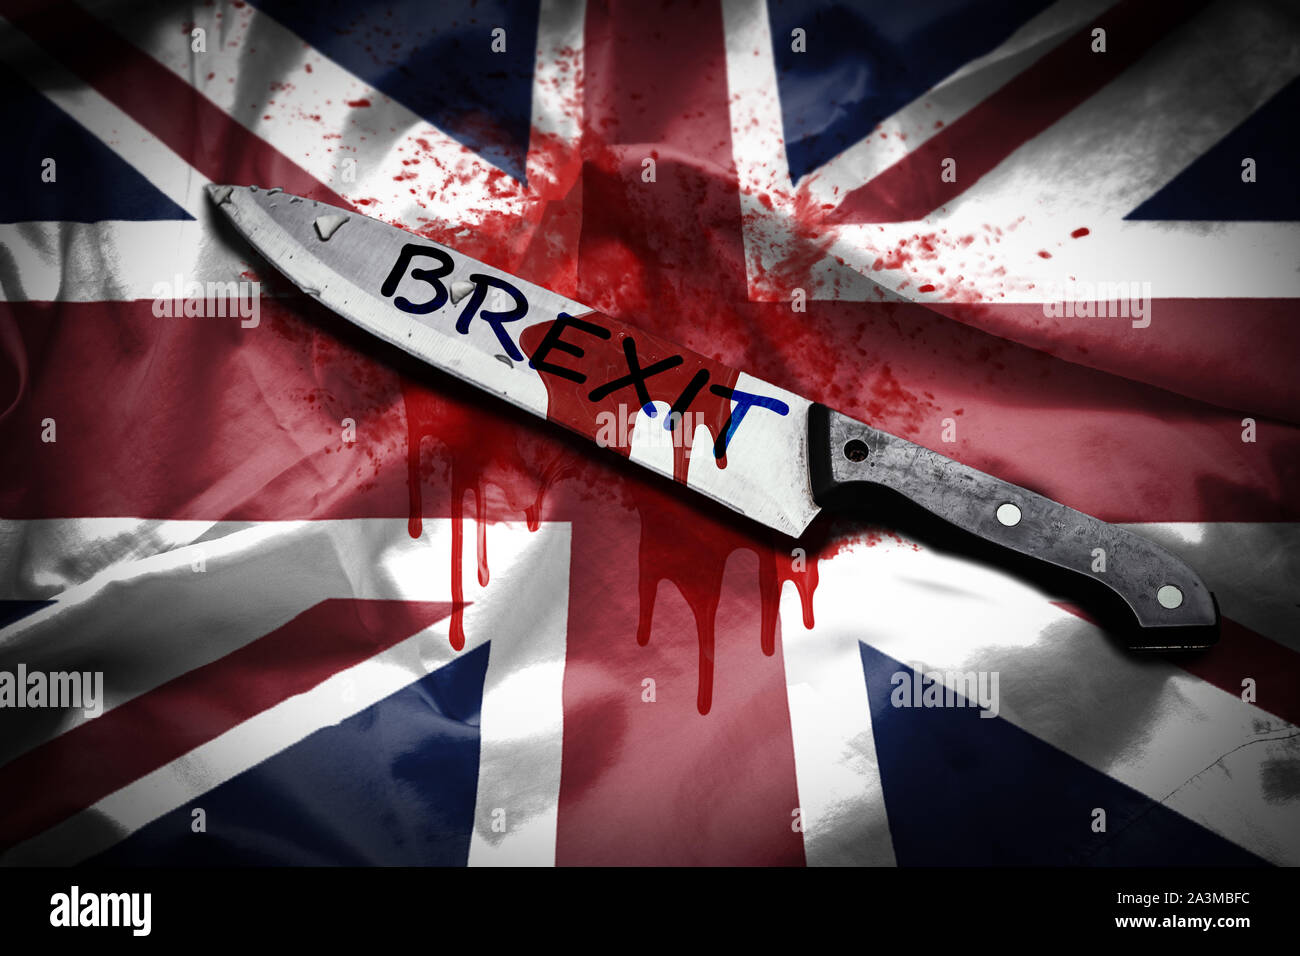 A long knife with the word Brexit stained with blood, placed on United Kingdom flag with blood spilled, Brexit concept Stock Photo